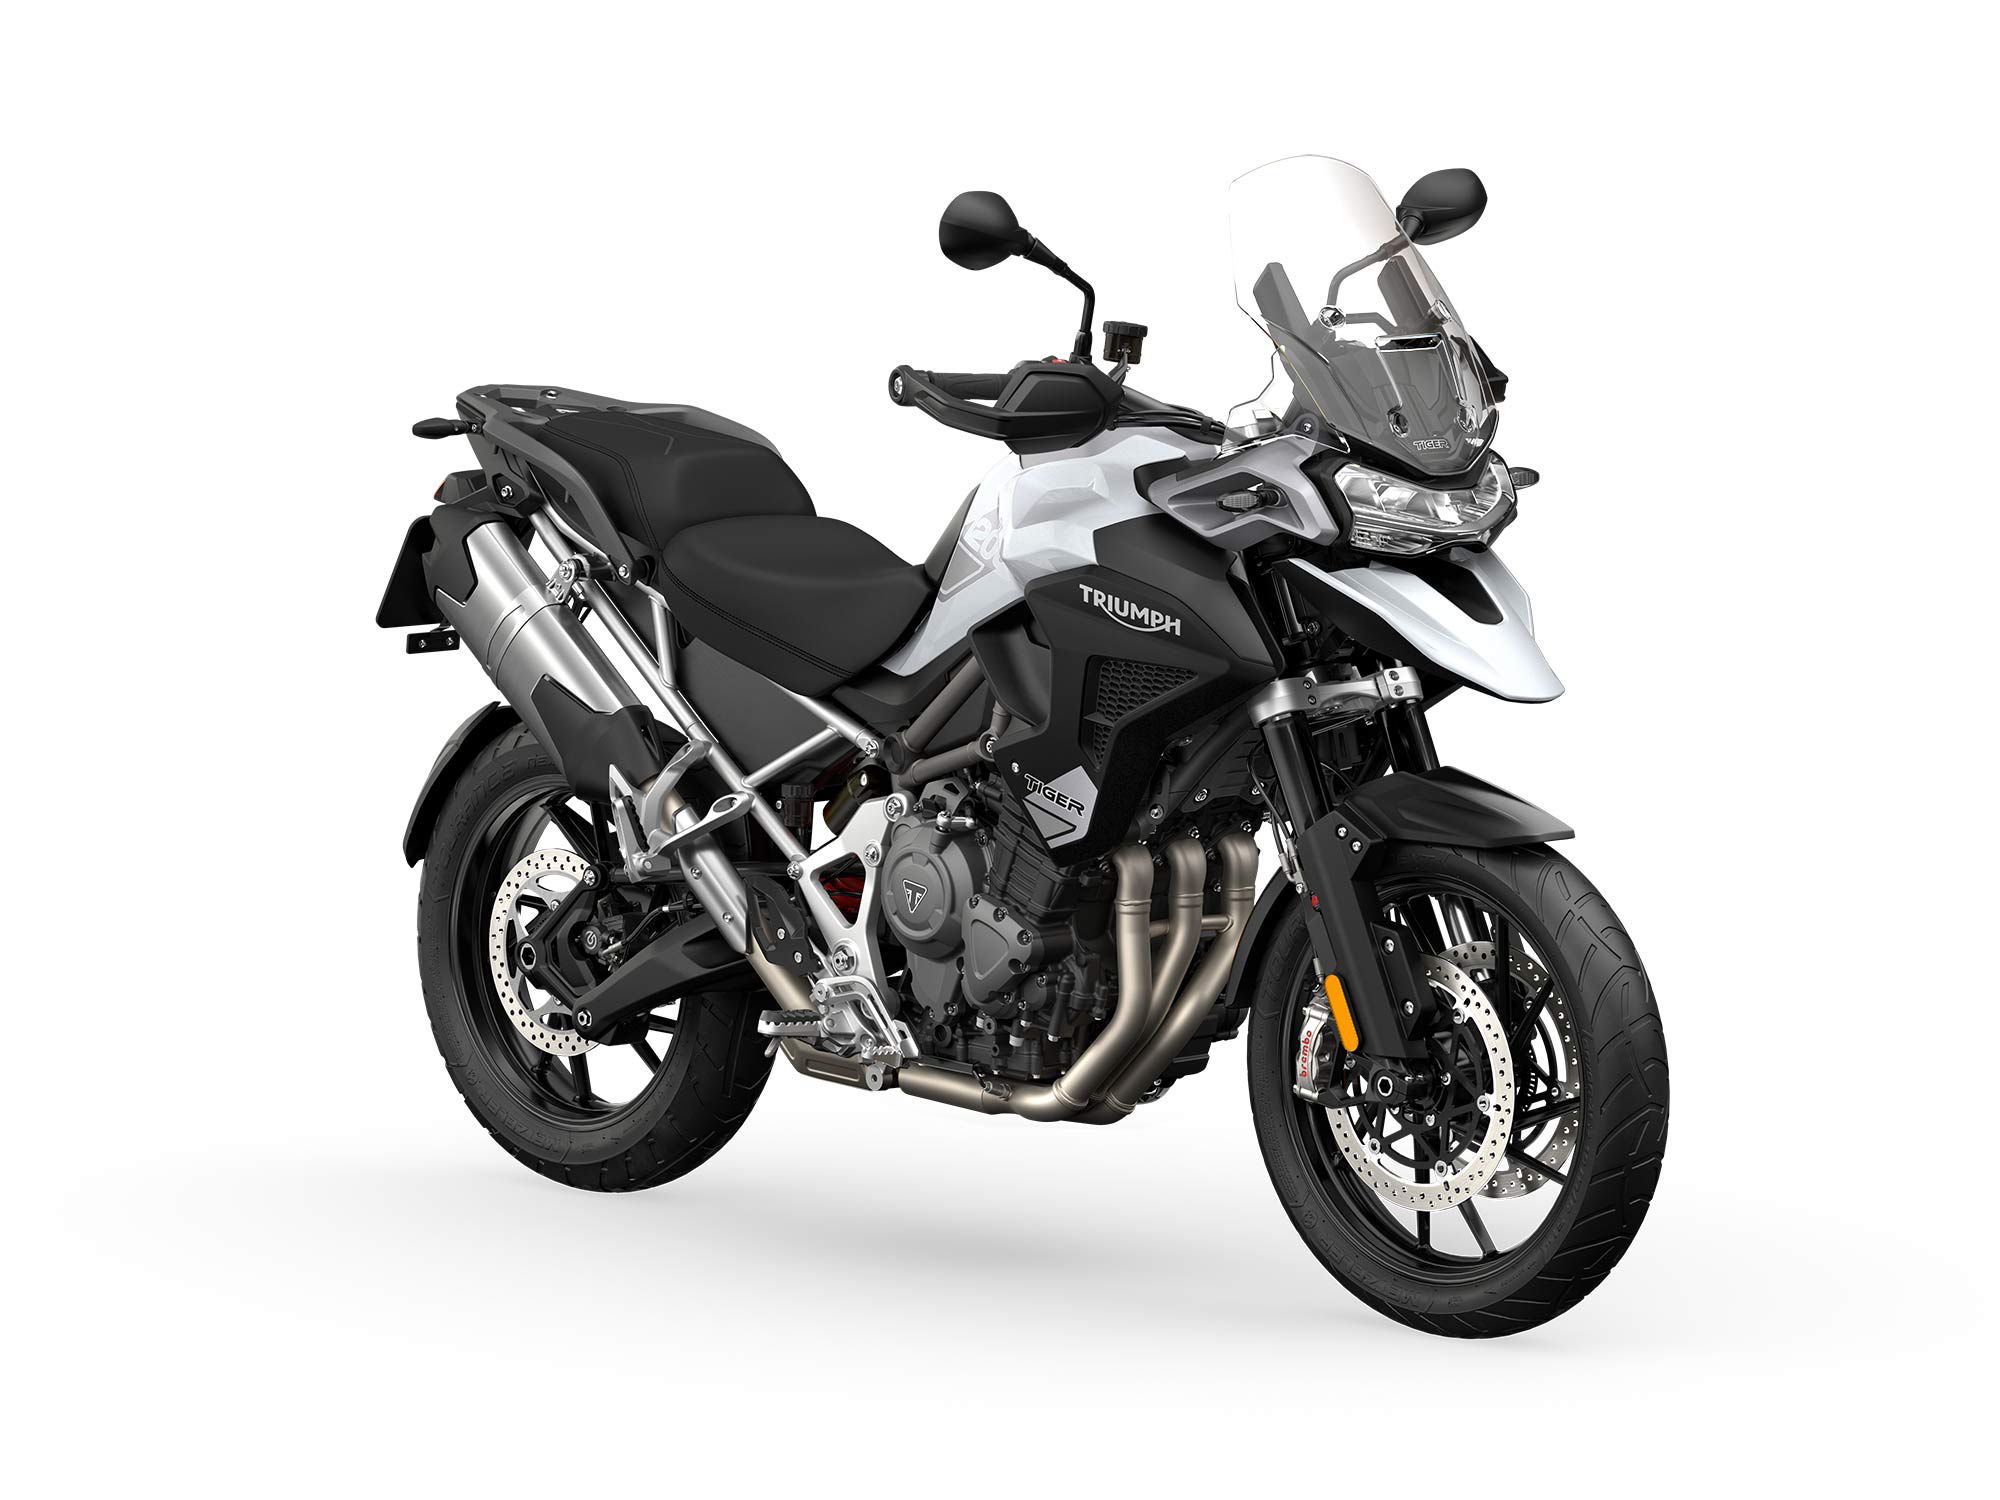 The 2022 Triumph Tiger GT will price at $19,100.